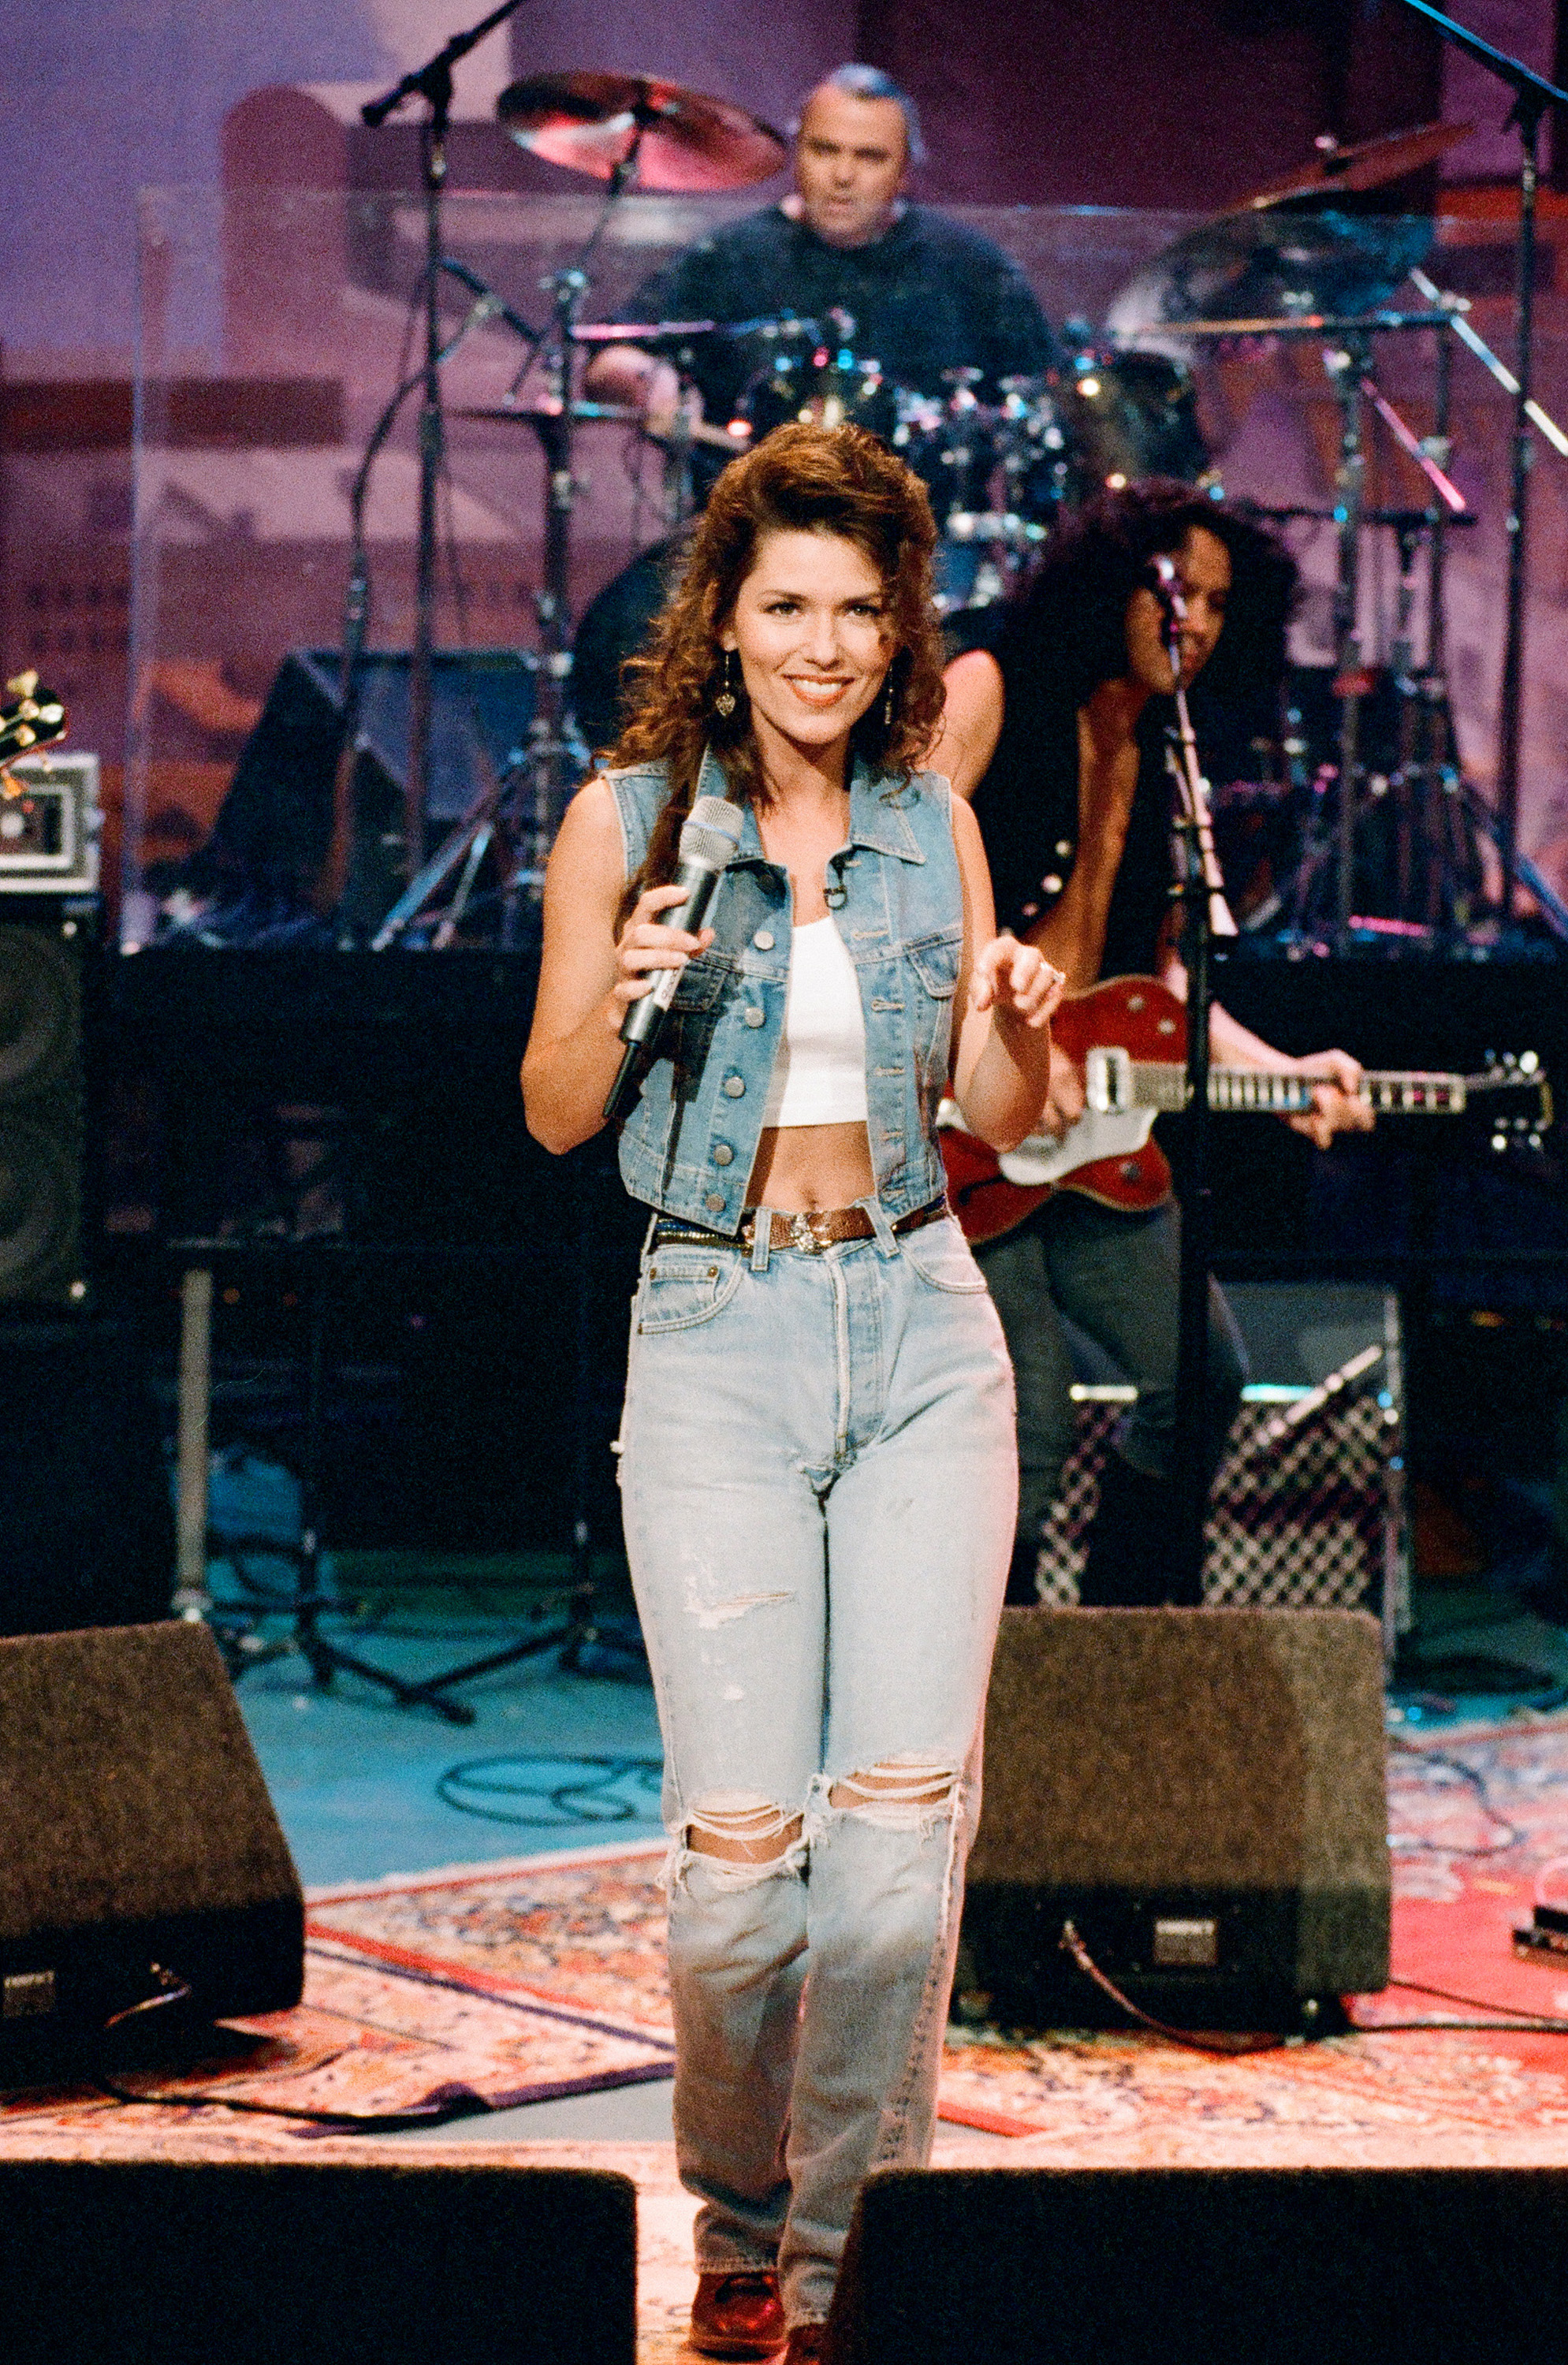 Shania Twain was the musical guest on The Tonight Show with Jay Leno on July 12, 1995